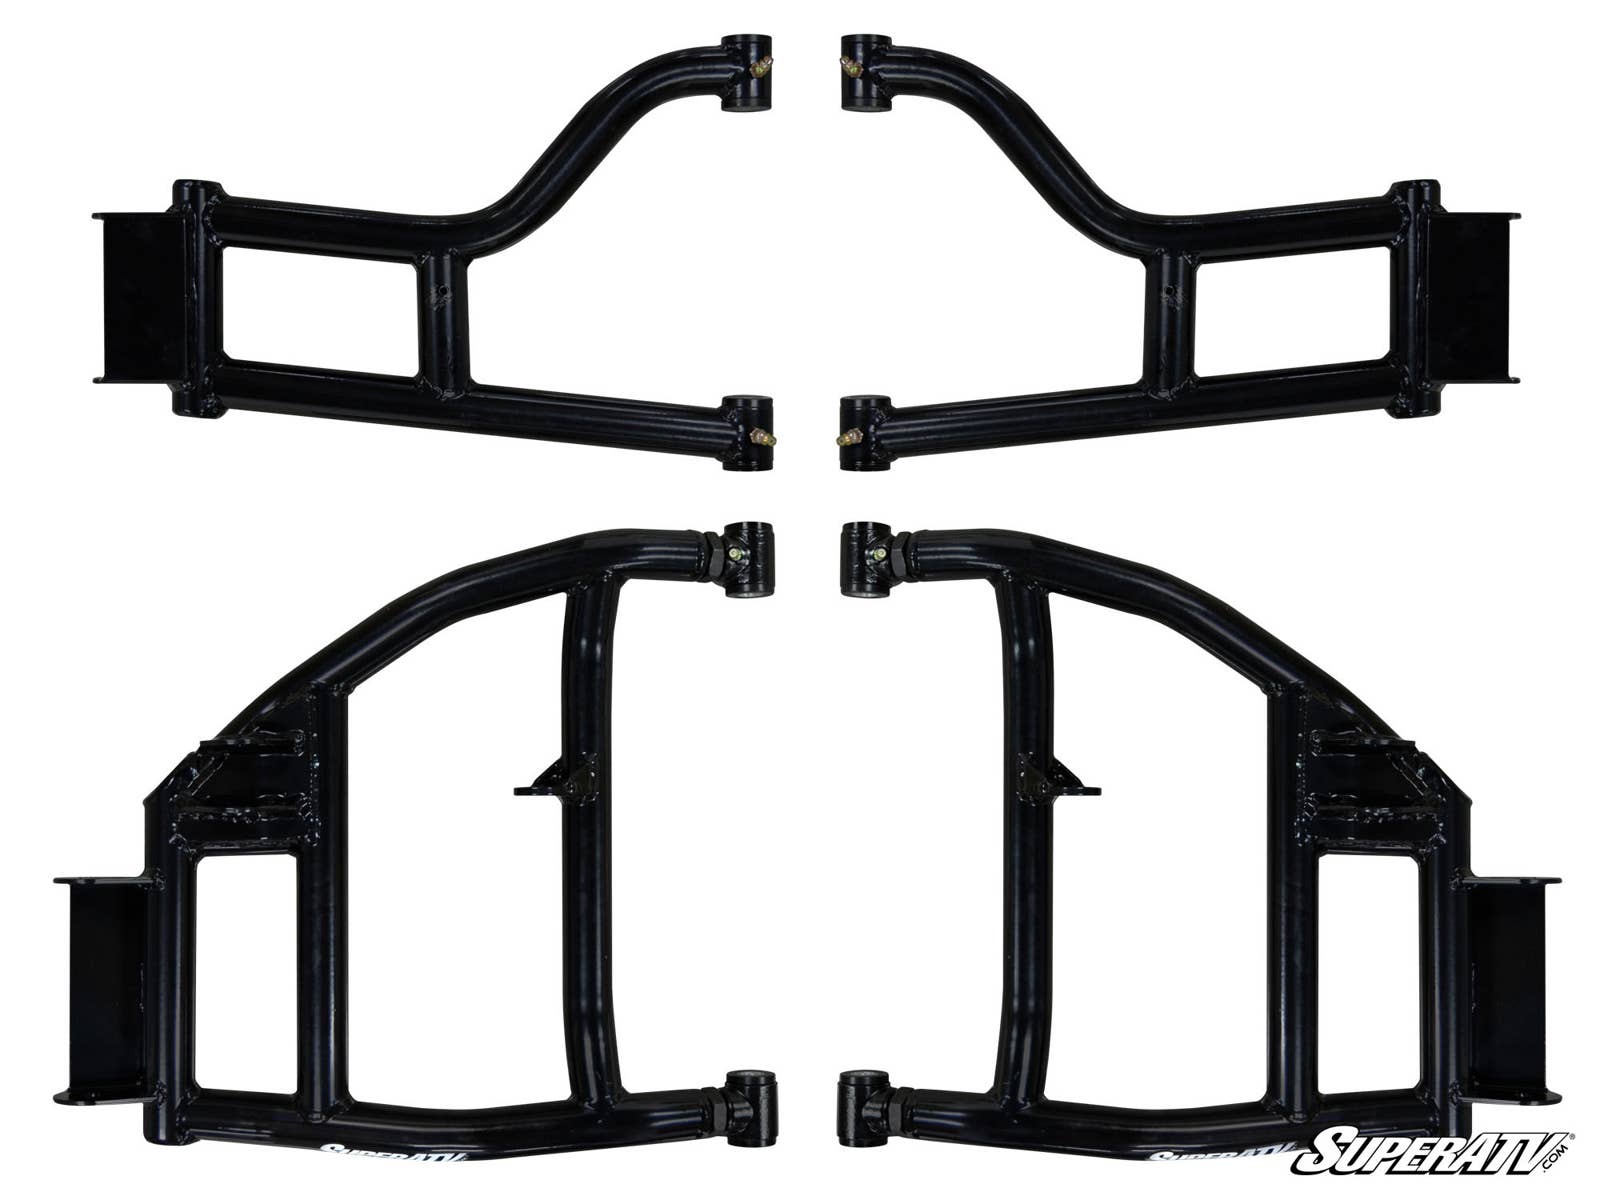 HONDA PIONEER 1000 HIGH CLEARANCE 1.5" OFFSET REAR A-ARMS